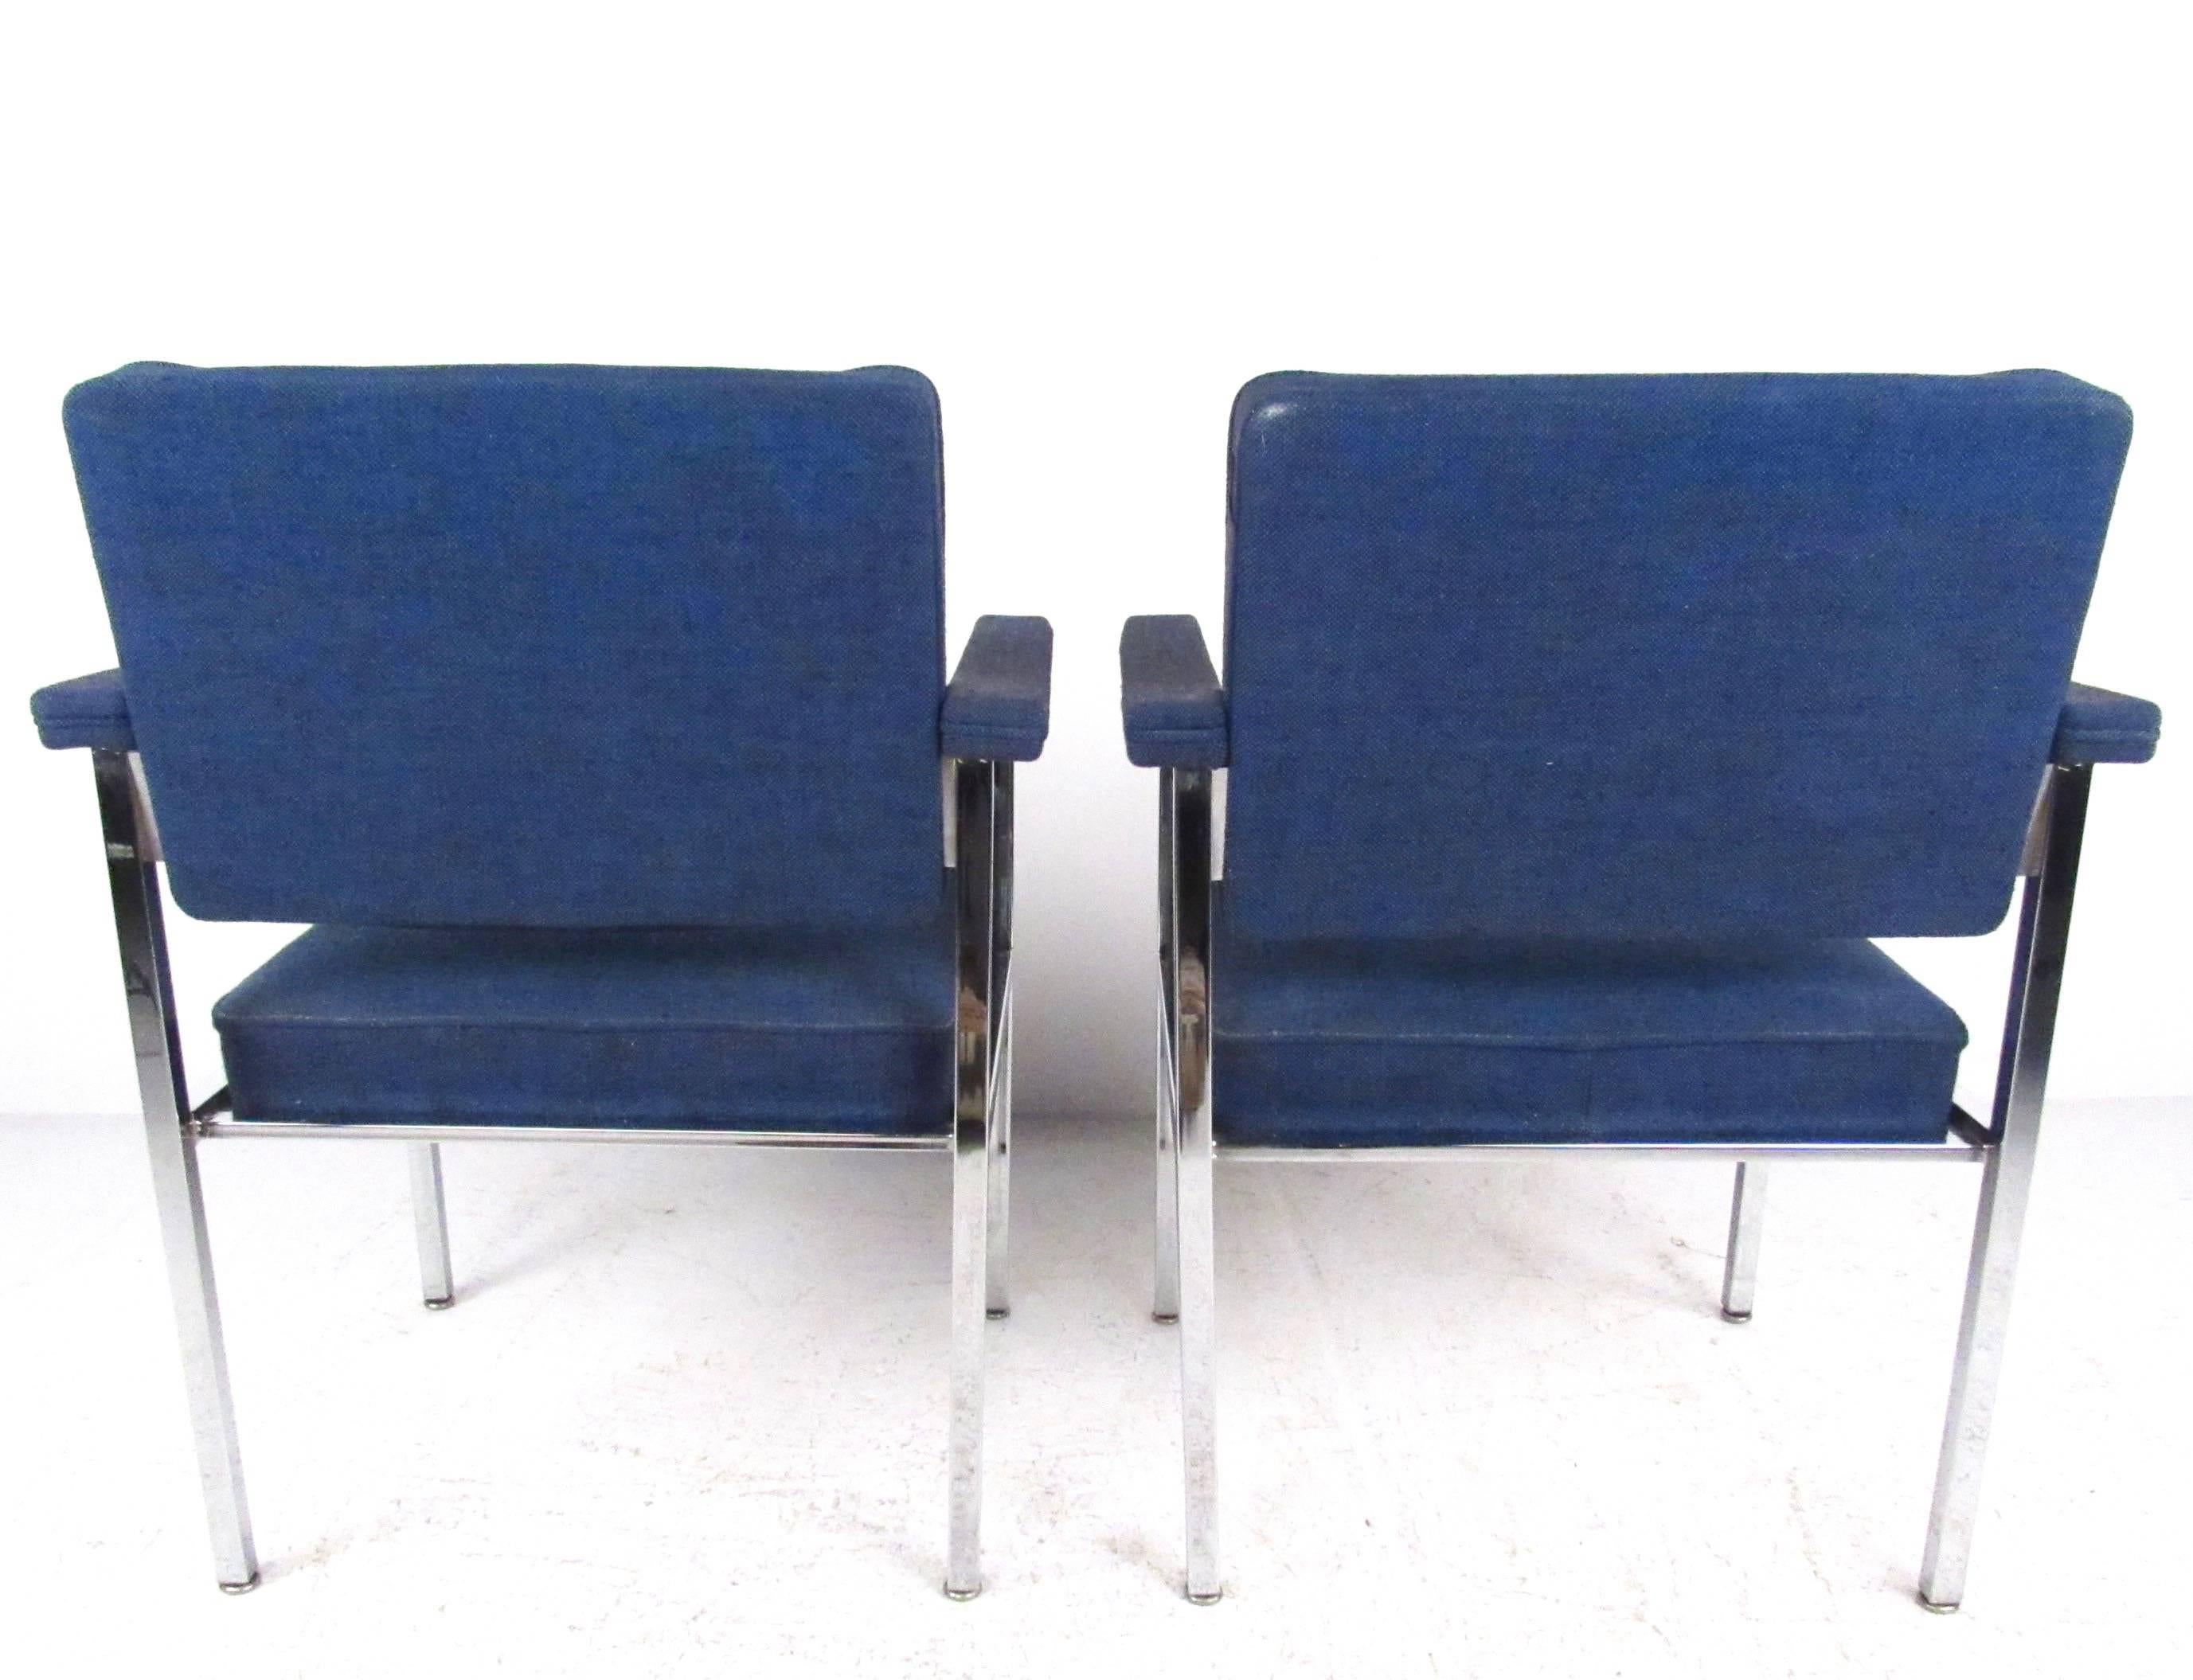 Late 20th Century Pair of Mid-Century Modern Chrome Armchairs For Sale